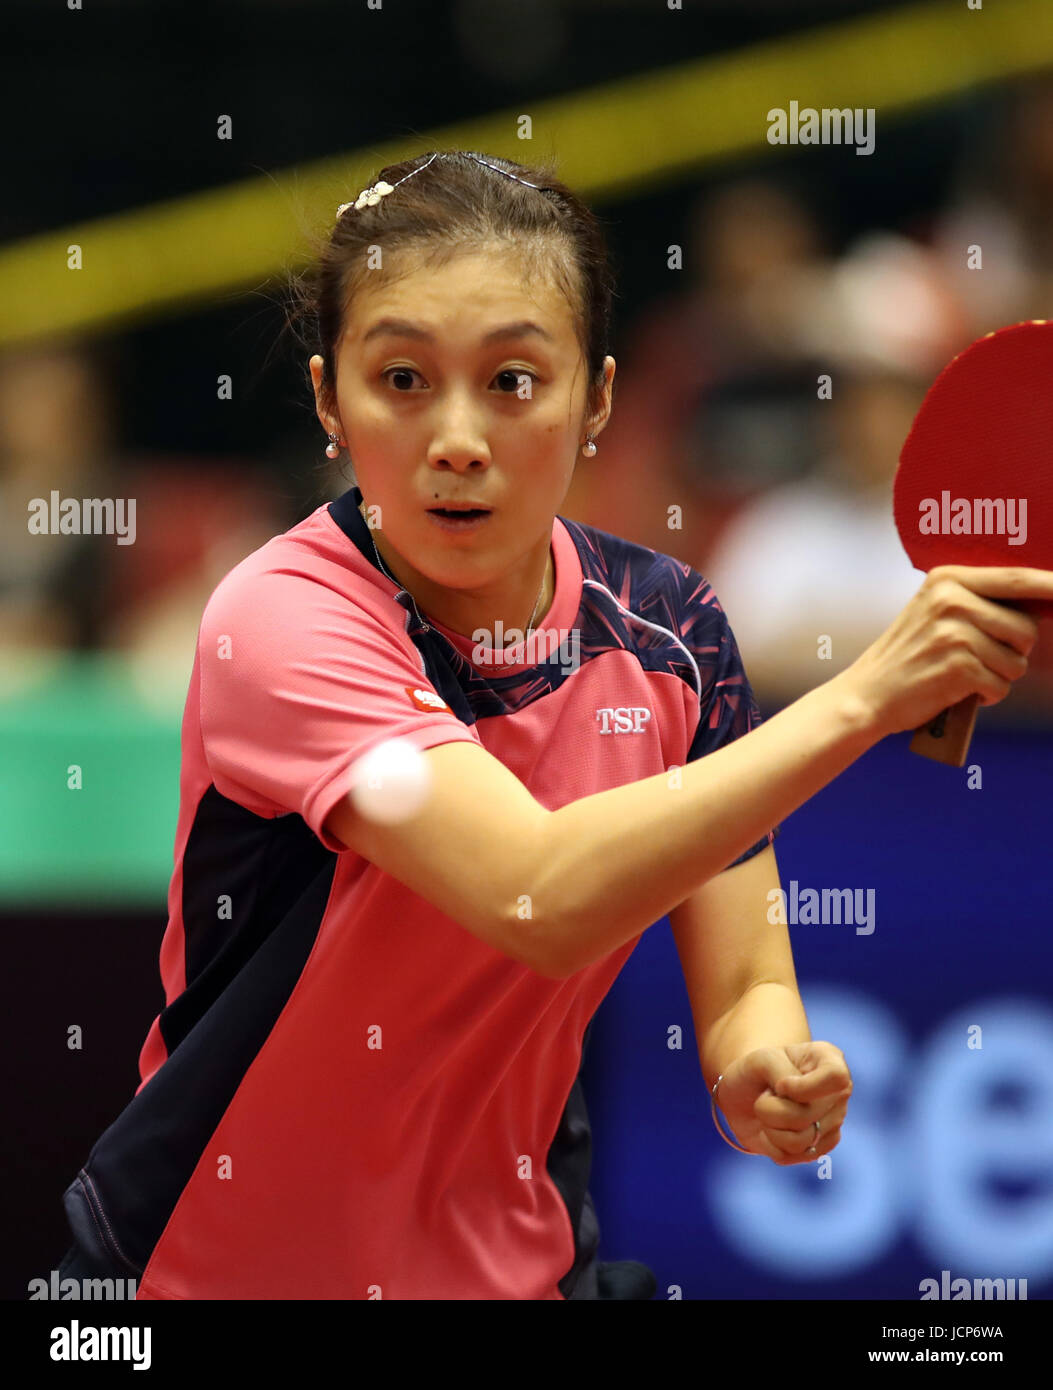 Tokyo, Japan. 17th June, 2017. German table tennis player Ying Han returns  the ball against Cheng I-Ching of Taiwan during women's singles quarter  finals of the ITTF World Tour Platinum Japan Open